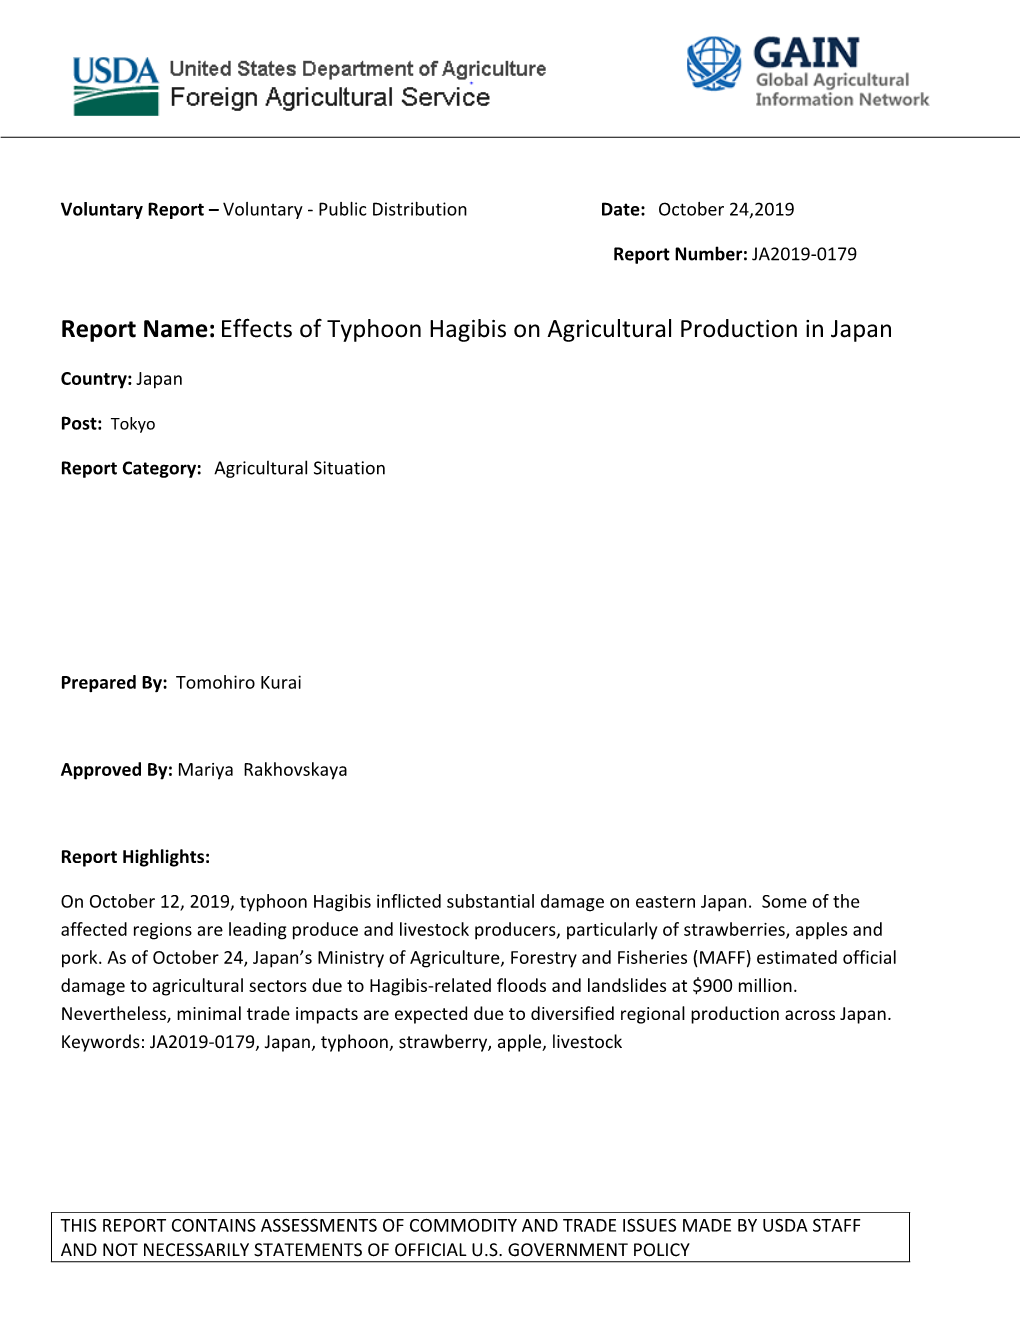 Effects of Typhoon Hagibis on Agricultural Production in Japan